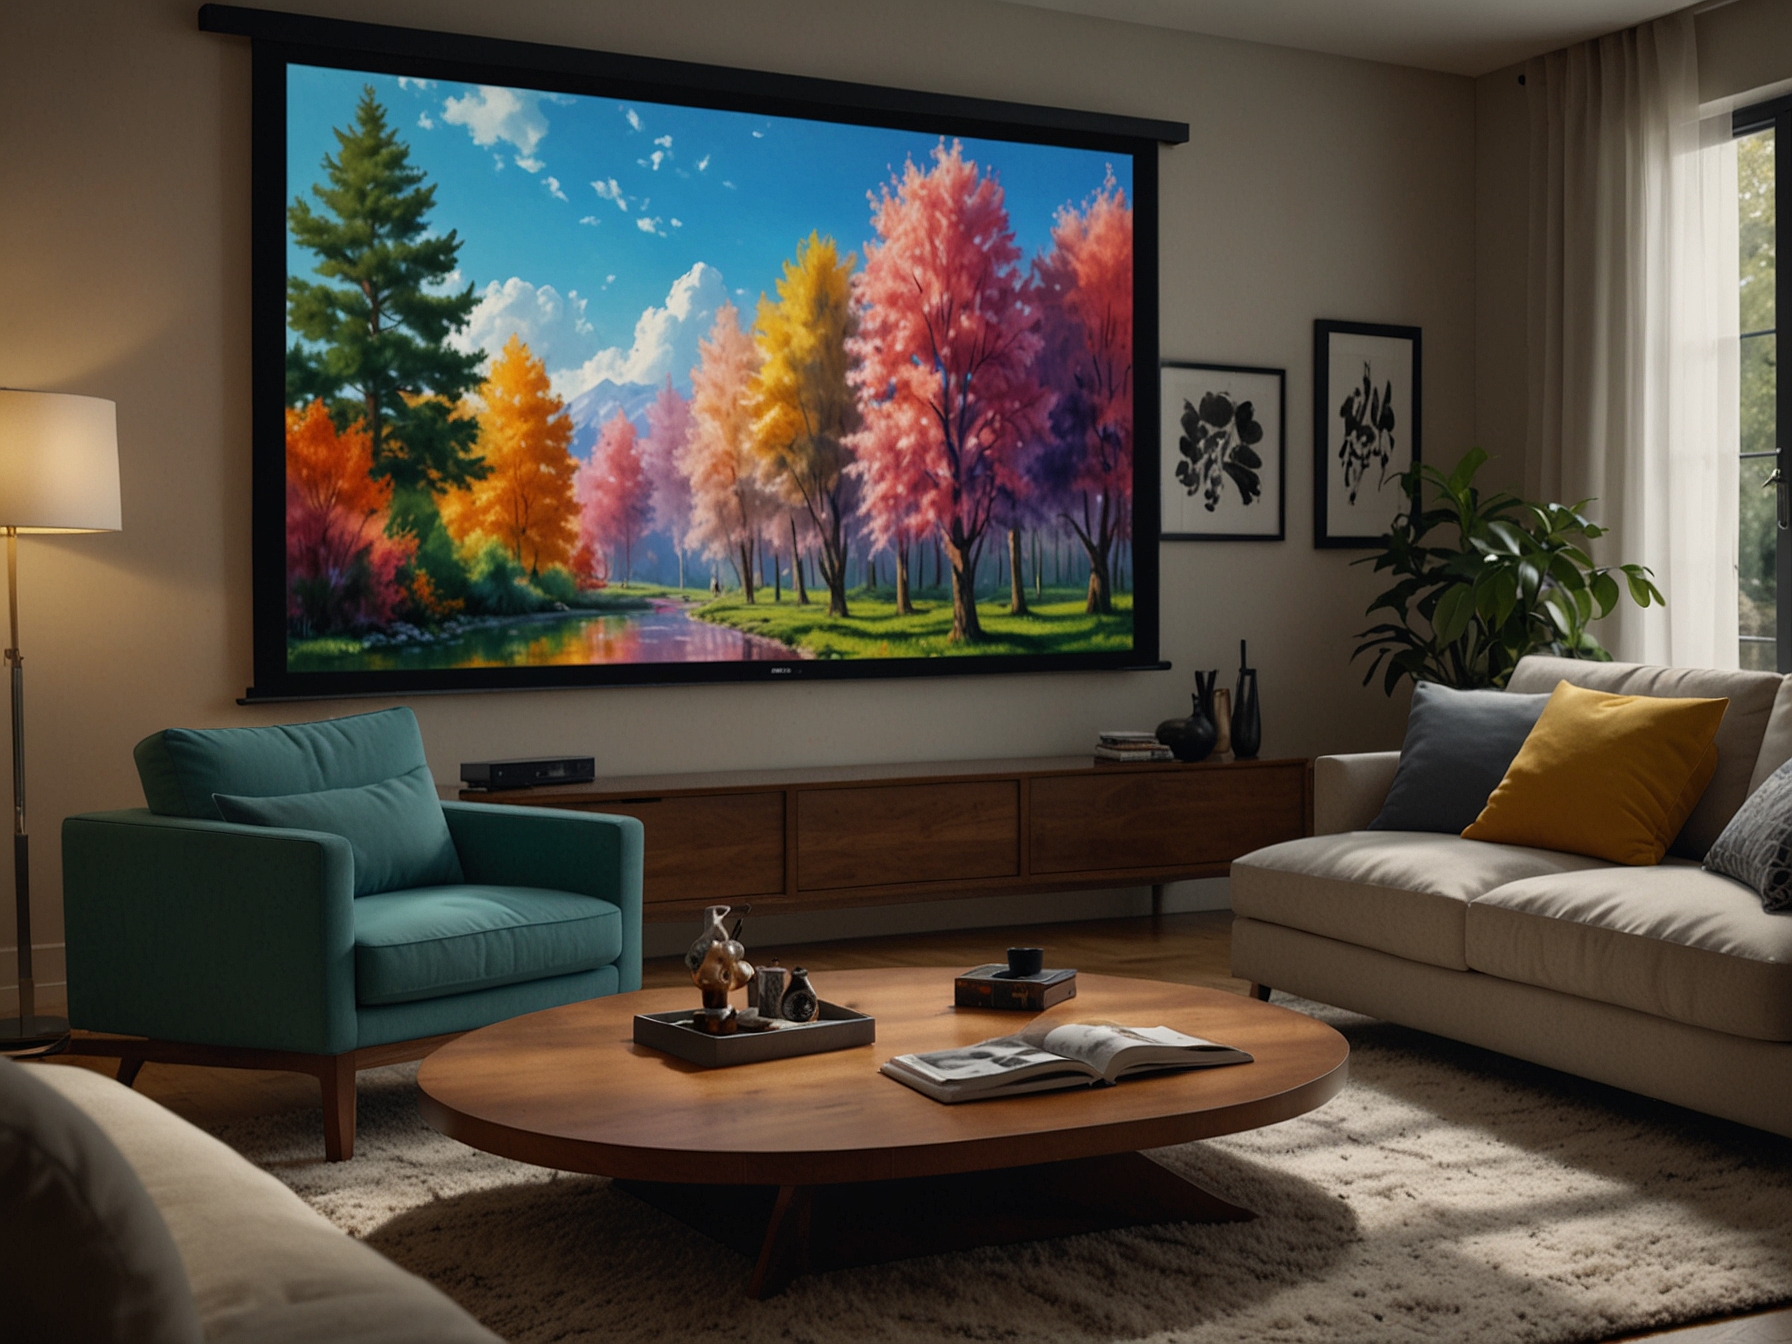 An image showing the Epson LS11000 projector in use, displaying vibrant 4K visuals in a well-lit living room to demonstrate its superior brightness and HDR capabilities.